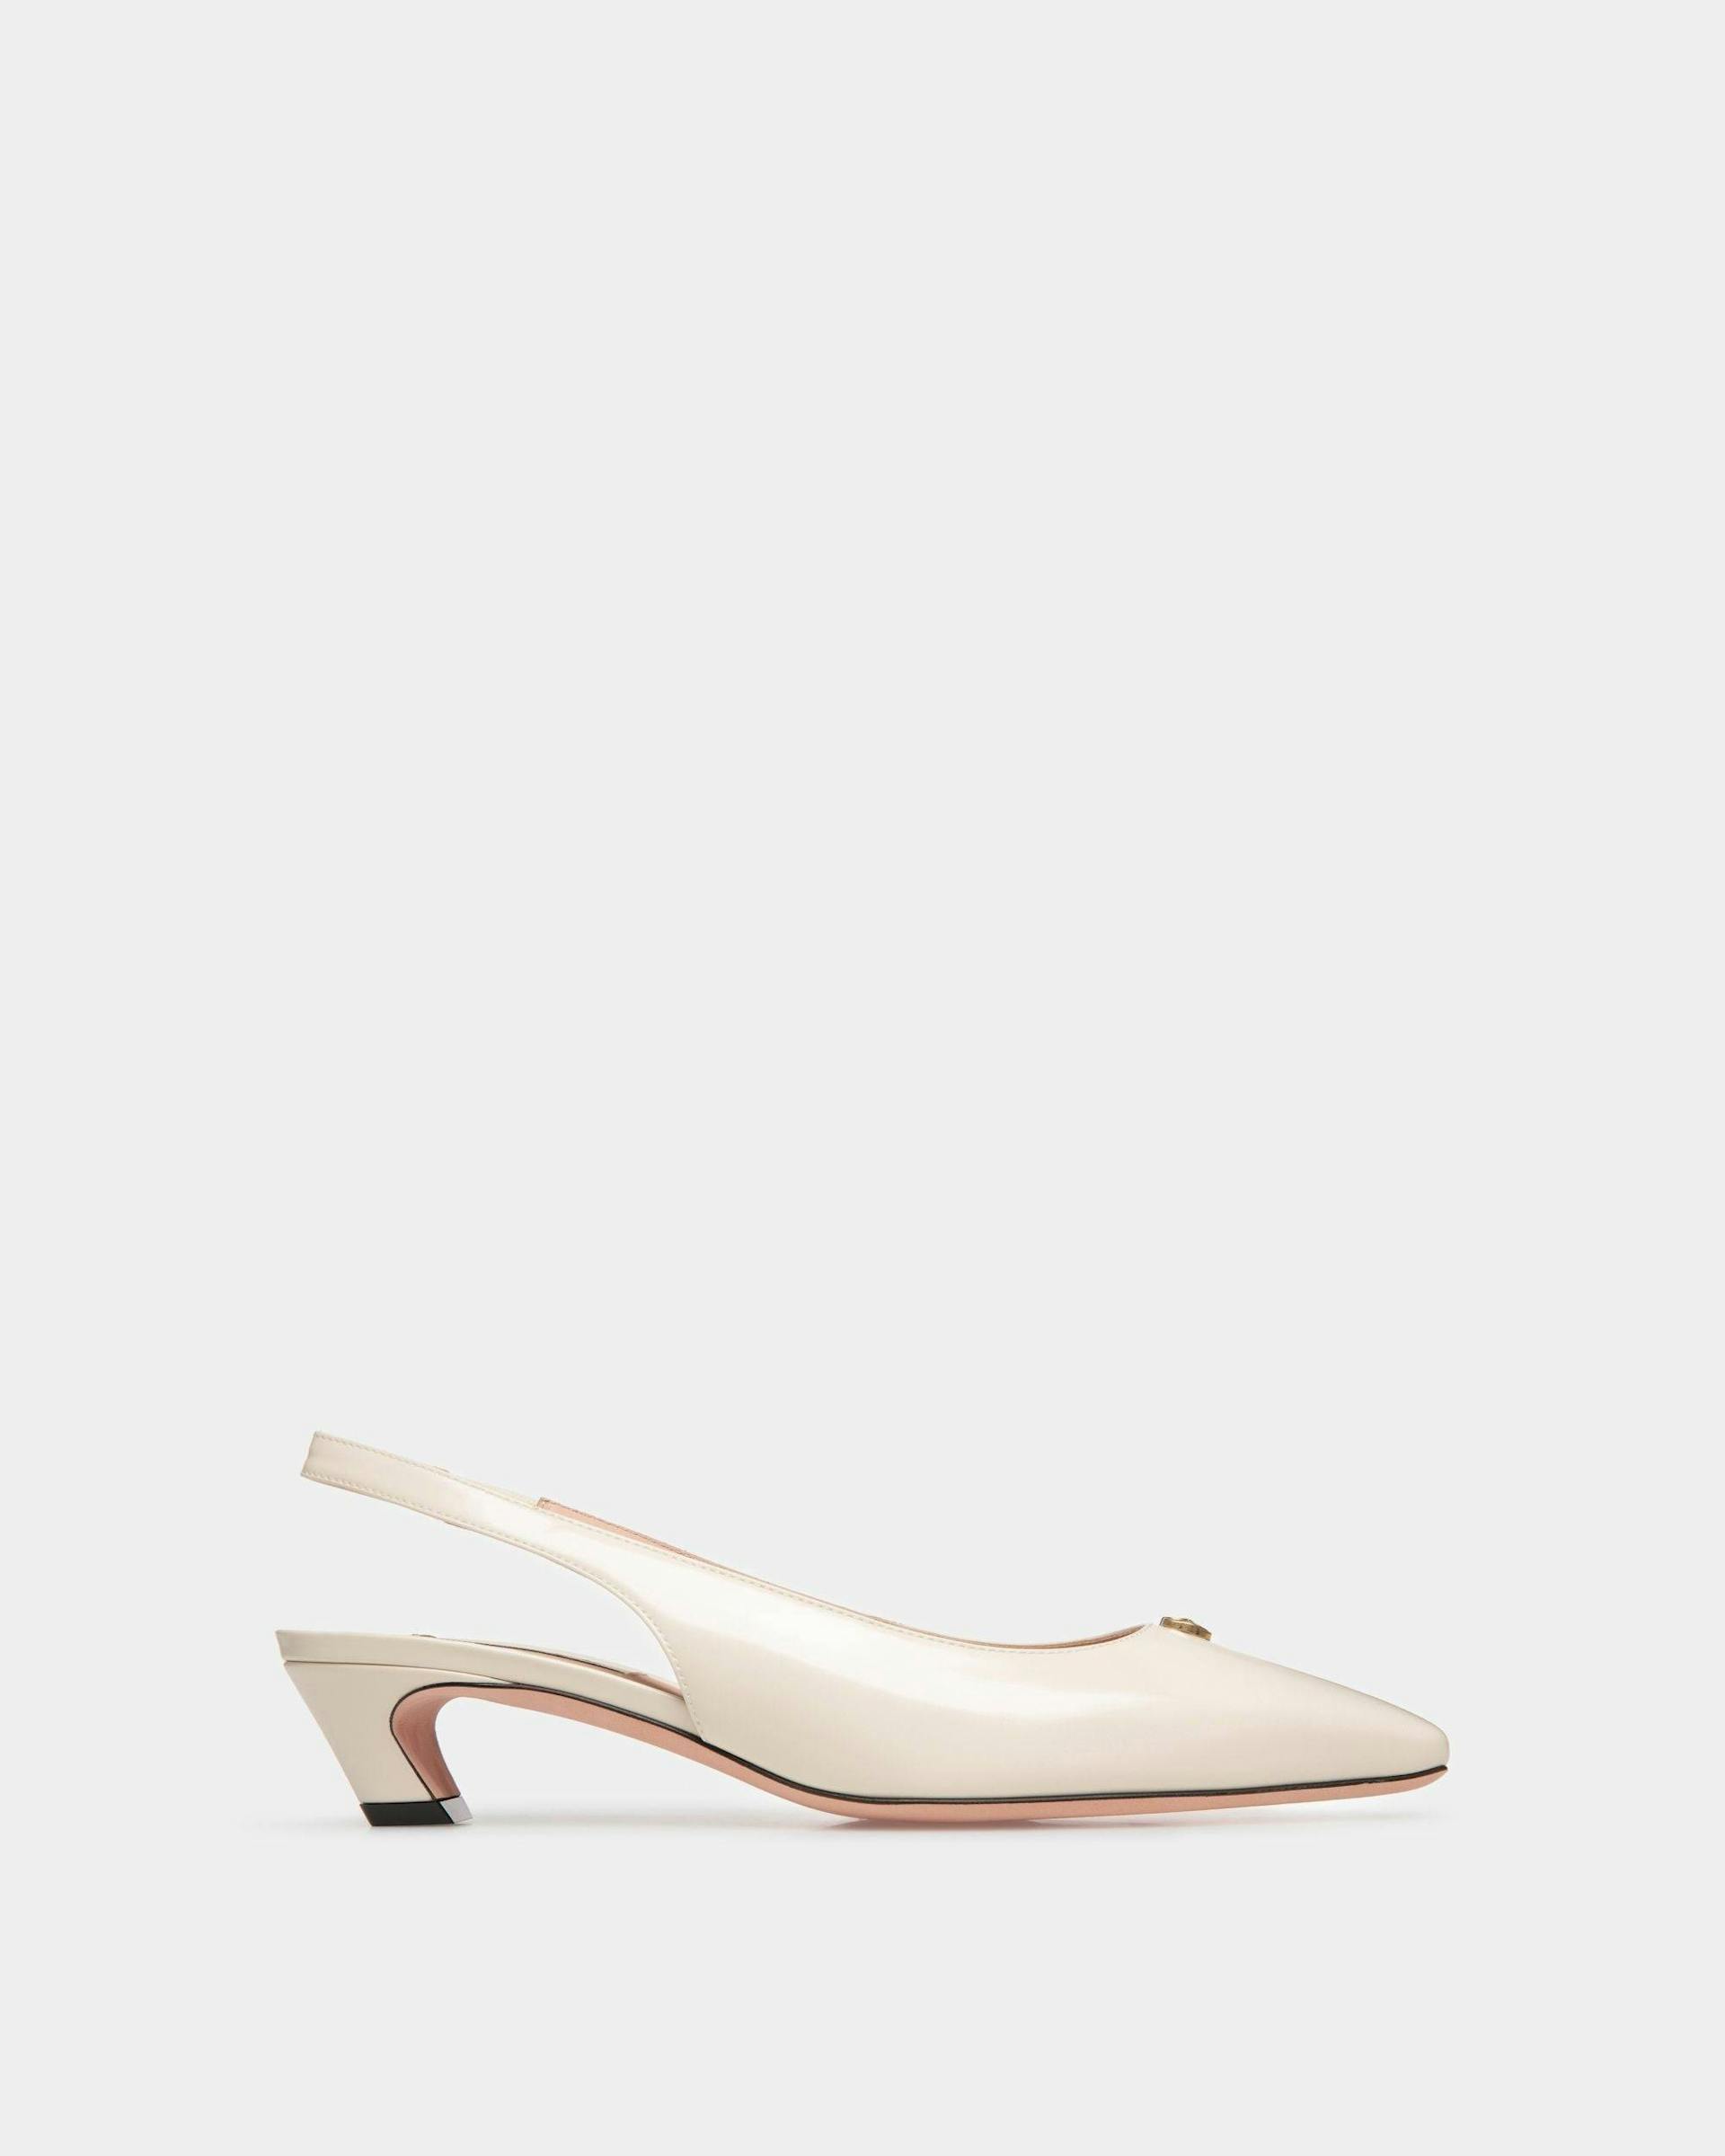 Women's Sylt Slingback Pump In White Leather | Bally | Still Life Side